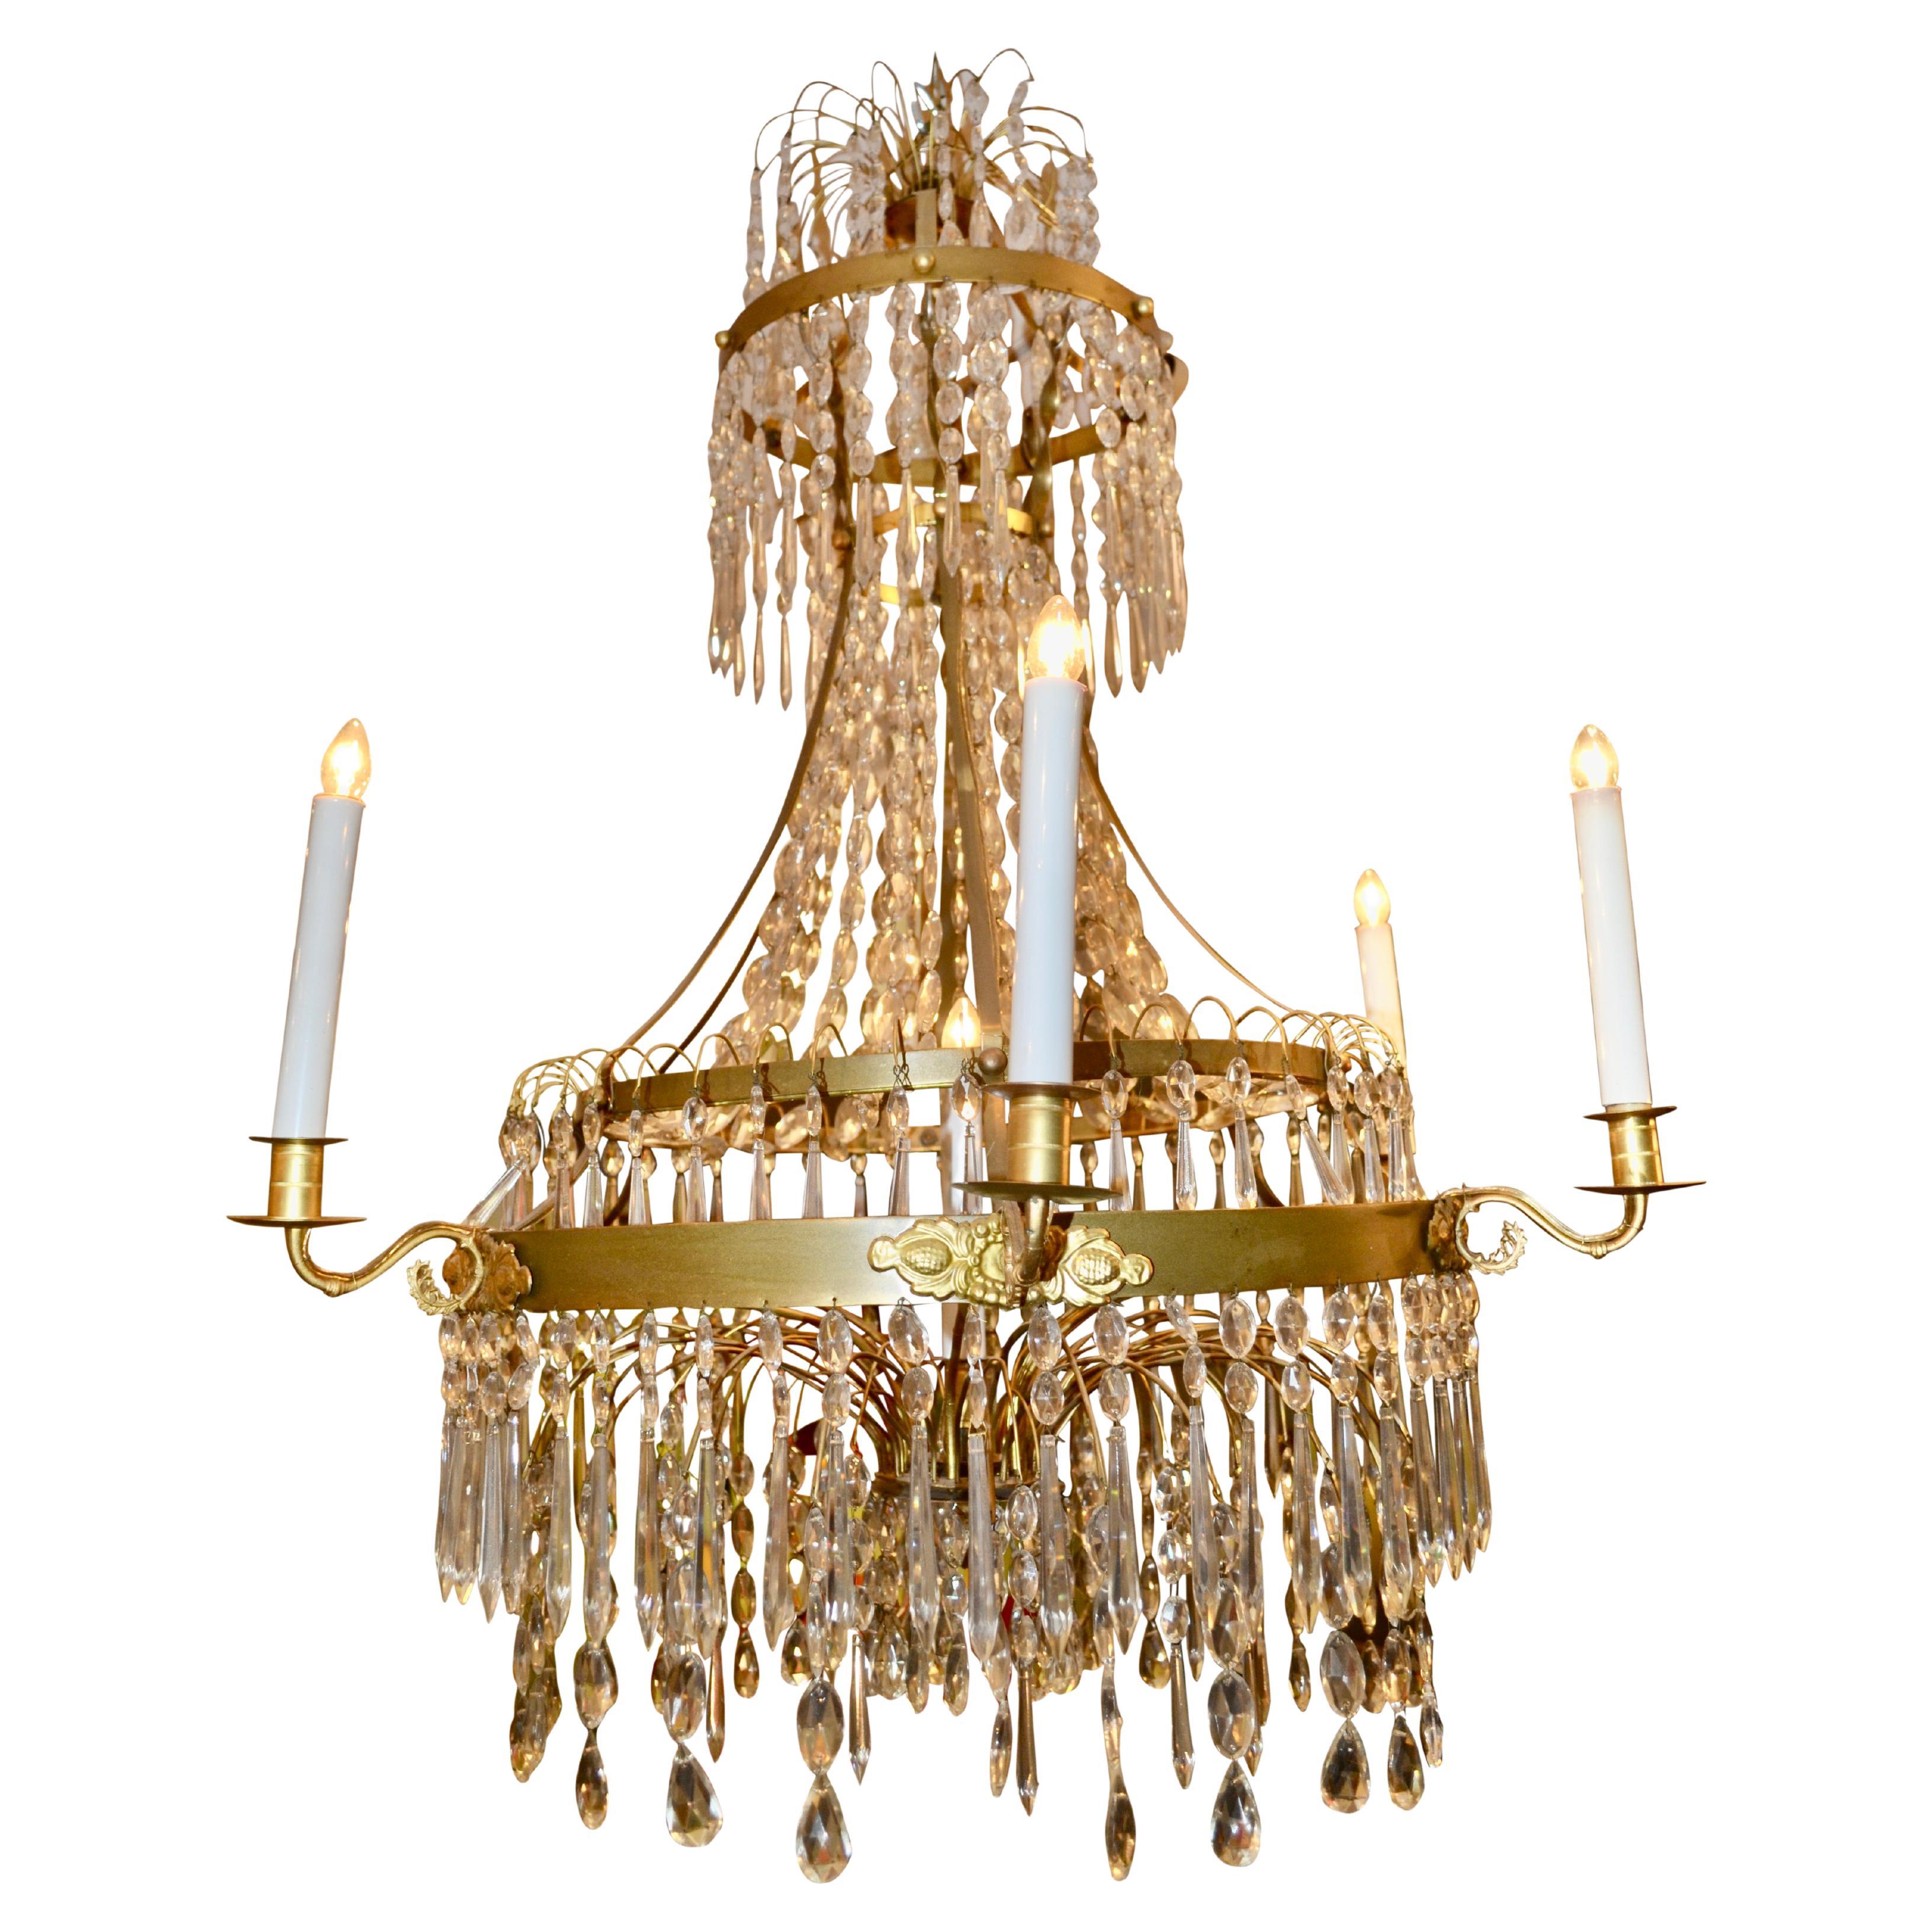 19th Century Baltic Neoclassical Style Crystal and Brass Chandelier